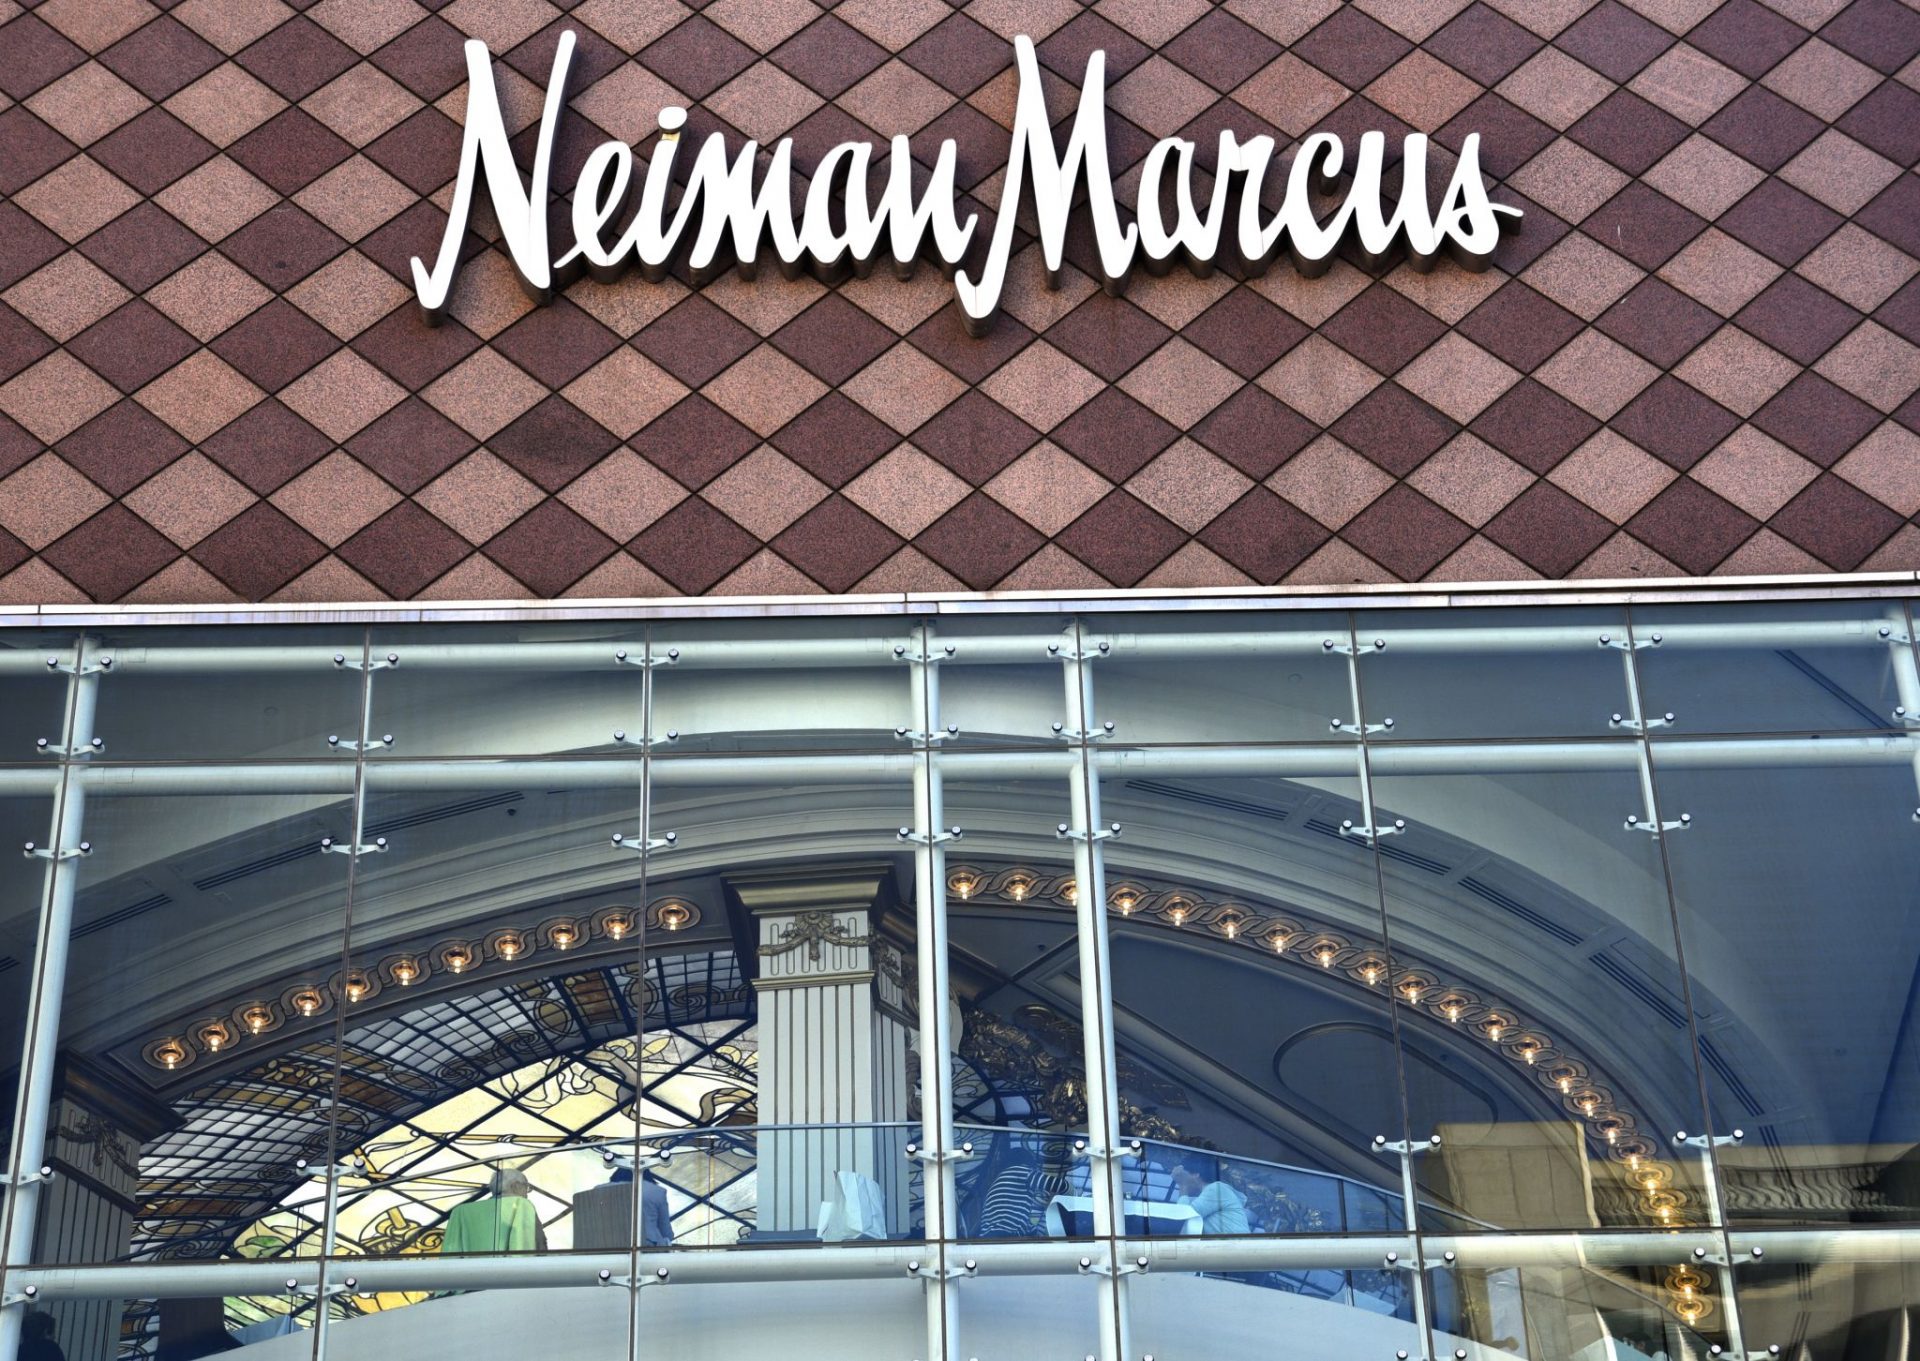 Video: Group of 10 americans runs out of SF Neiman Marcus with stolen handbags